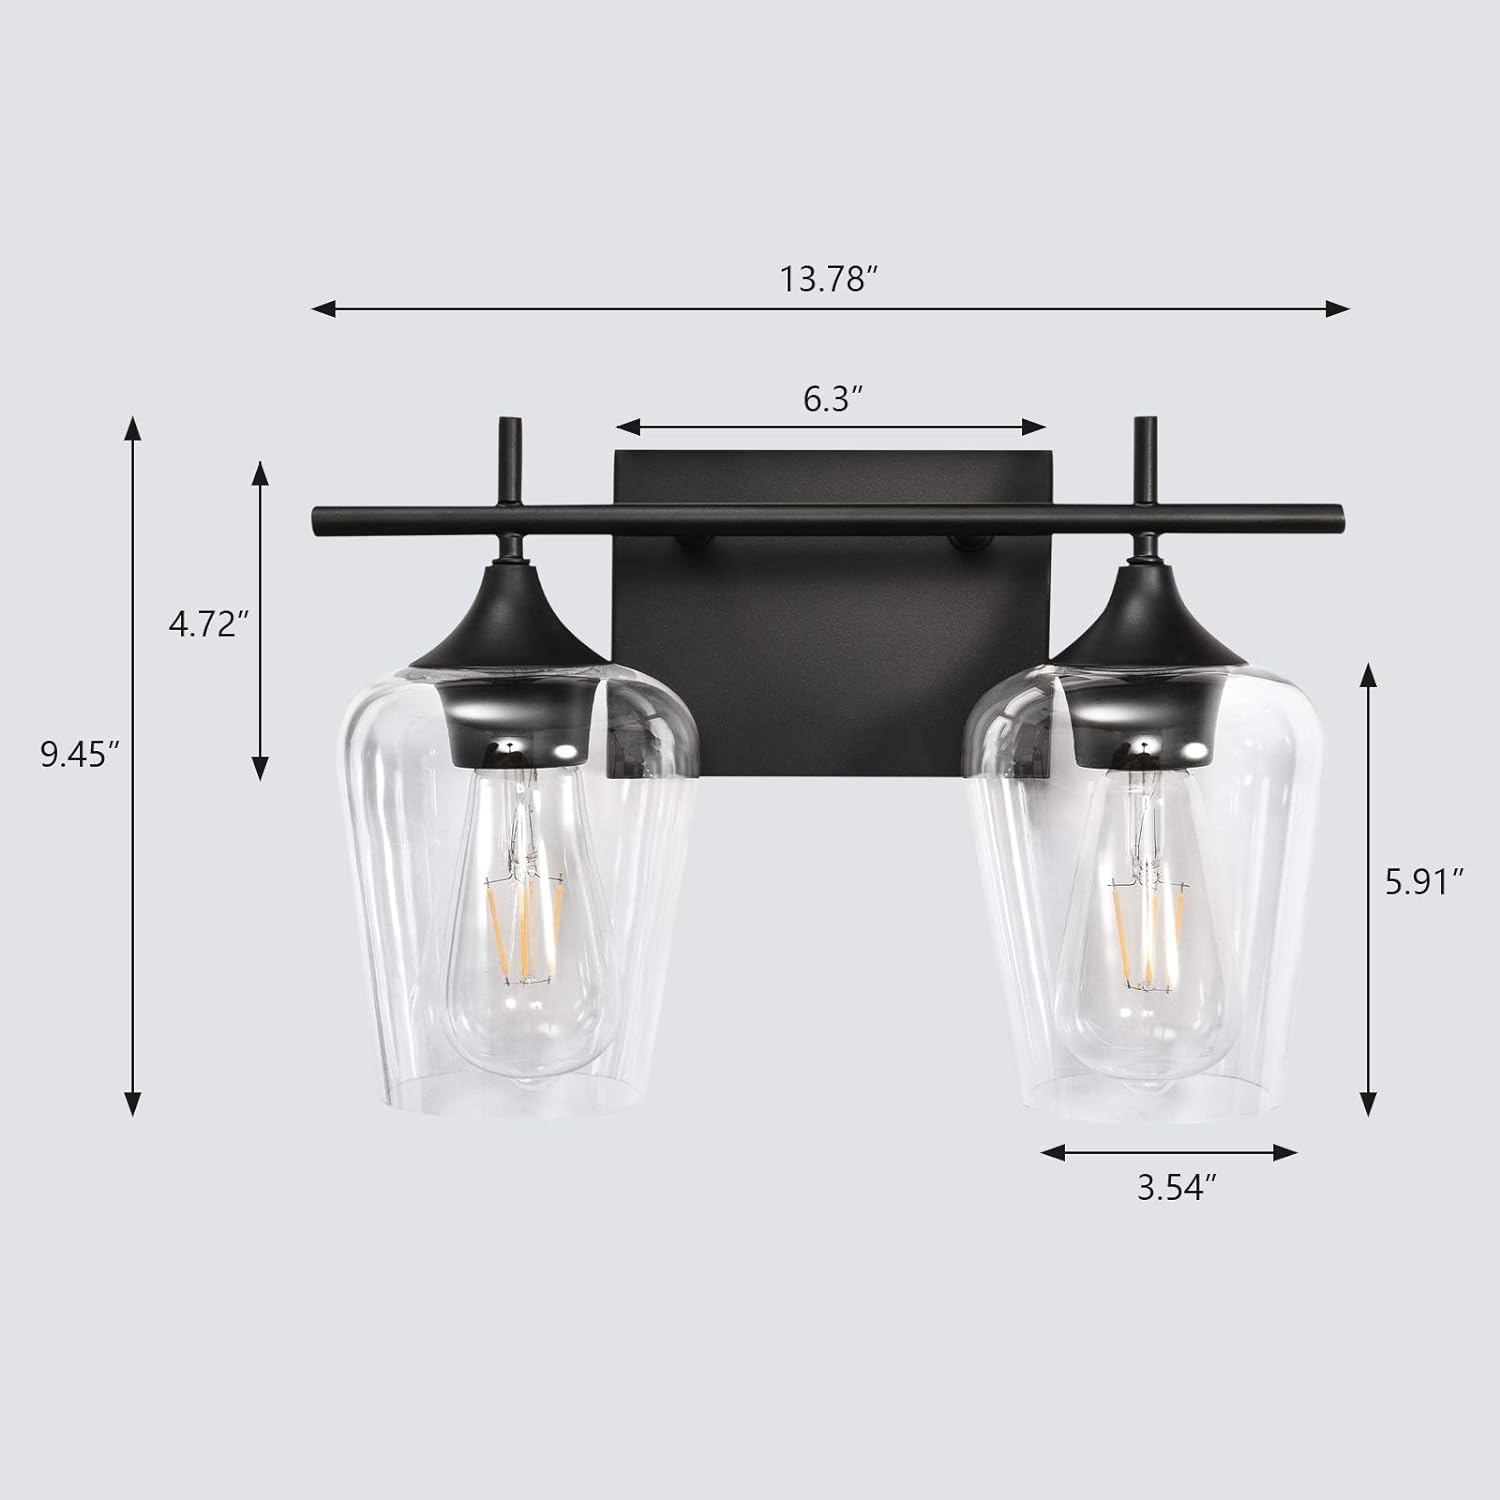 Vanity Lights Fixtures, Zicbol 2 Light Bathroom Light, Black Wall Light with Clear Glass Shade, Modern Bathroom Wall Sconce Lighting for Bath, Living Room, Bedroom, Stairs, Gallery, Restaurant